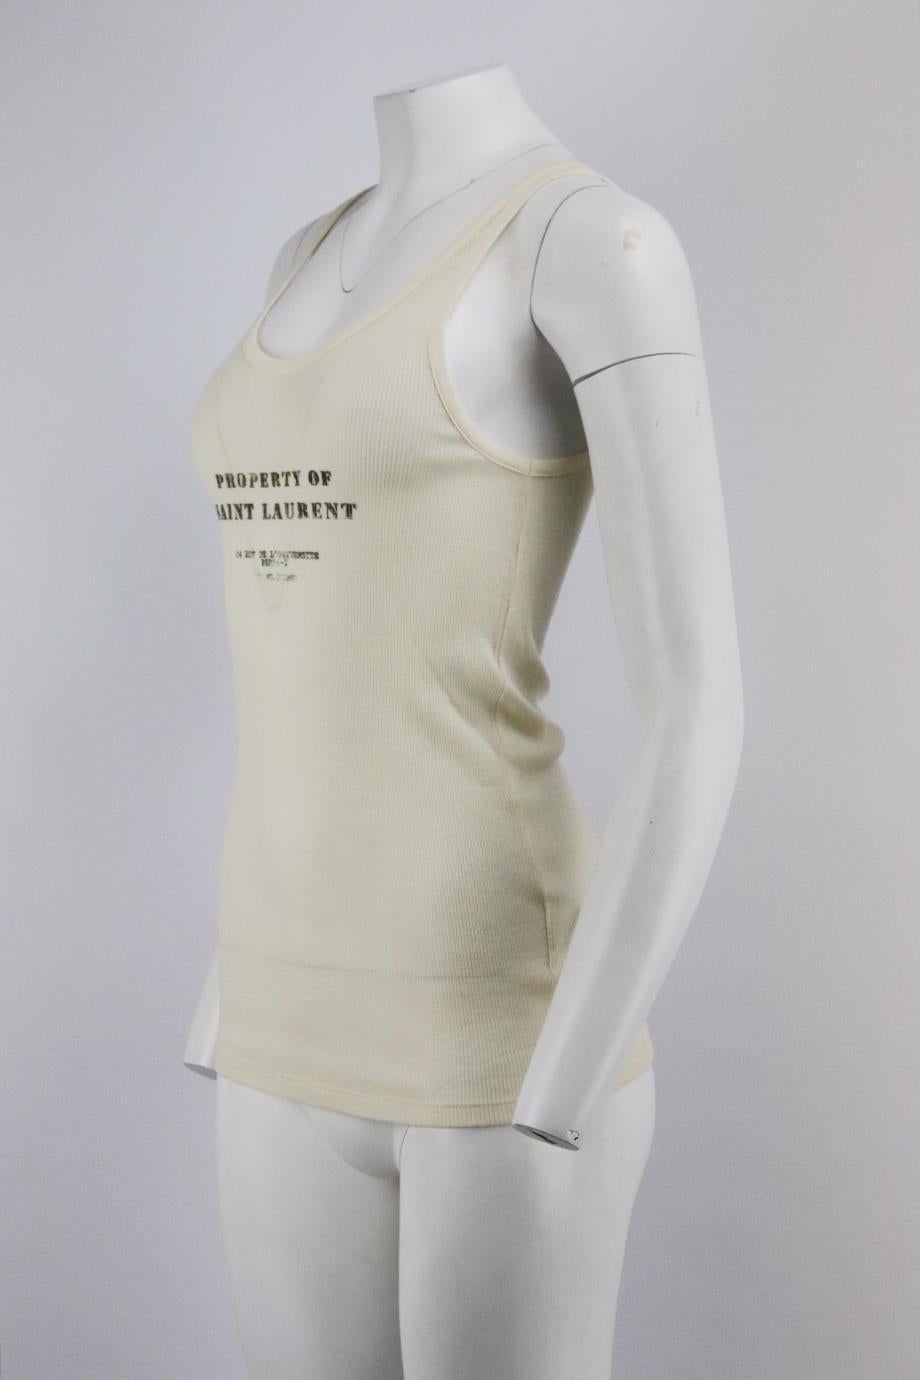 Saint Laurent printed ribbed stretch wool top. Cream. Sleeveless, crewneck. 100% Wool. Size: XSmall (UK 6, US 2, FR 34, IT 38). Bust: 26 in. Waist: 25 in. Hips: 28 in. Length: 26.5 in. Very good condition - No sign of wear; see pictures.
